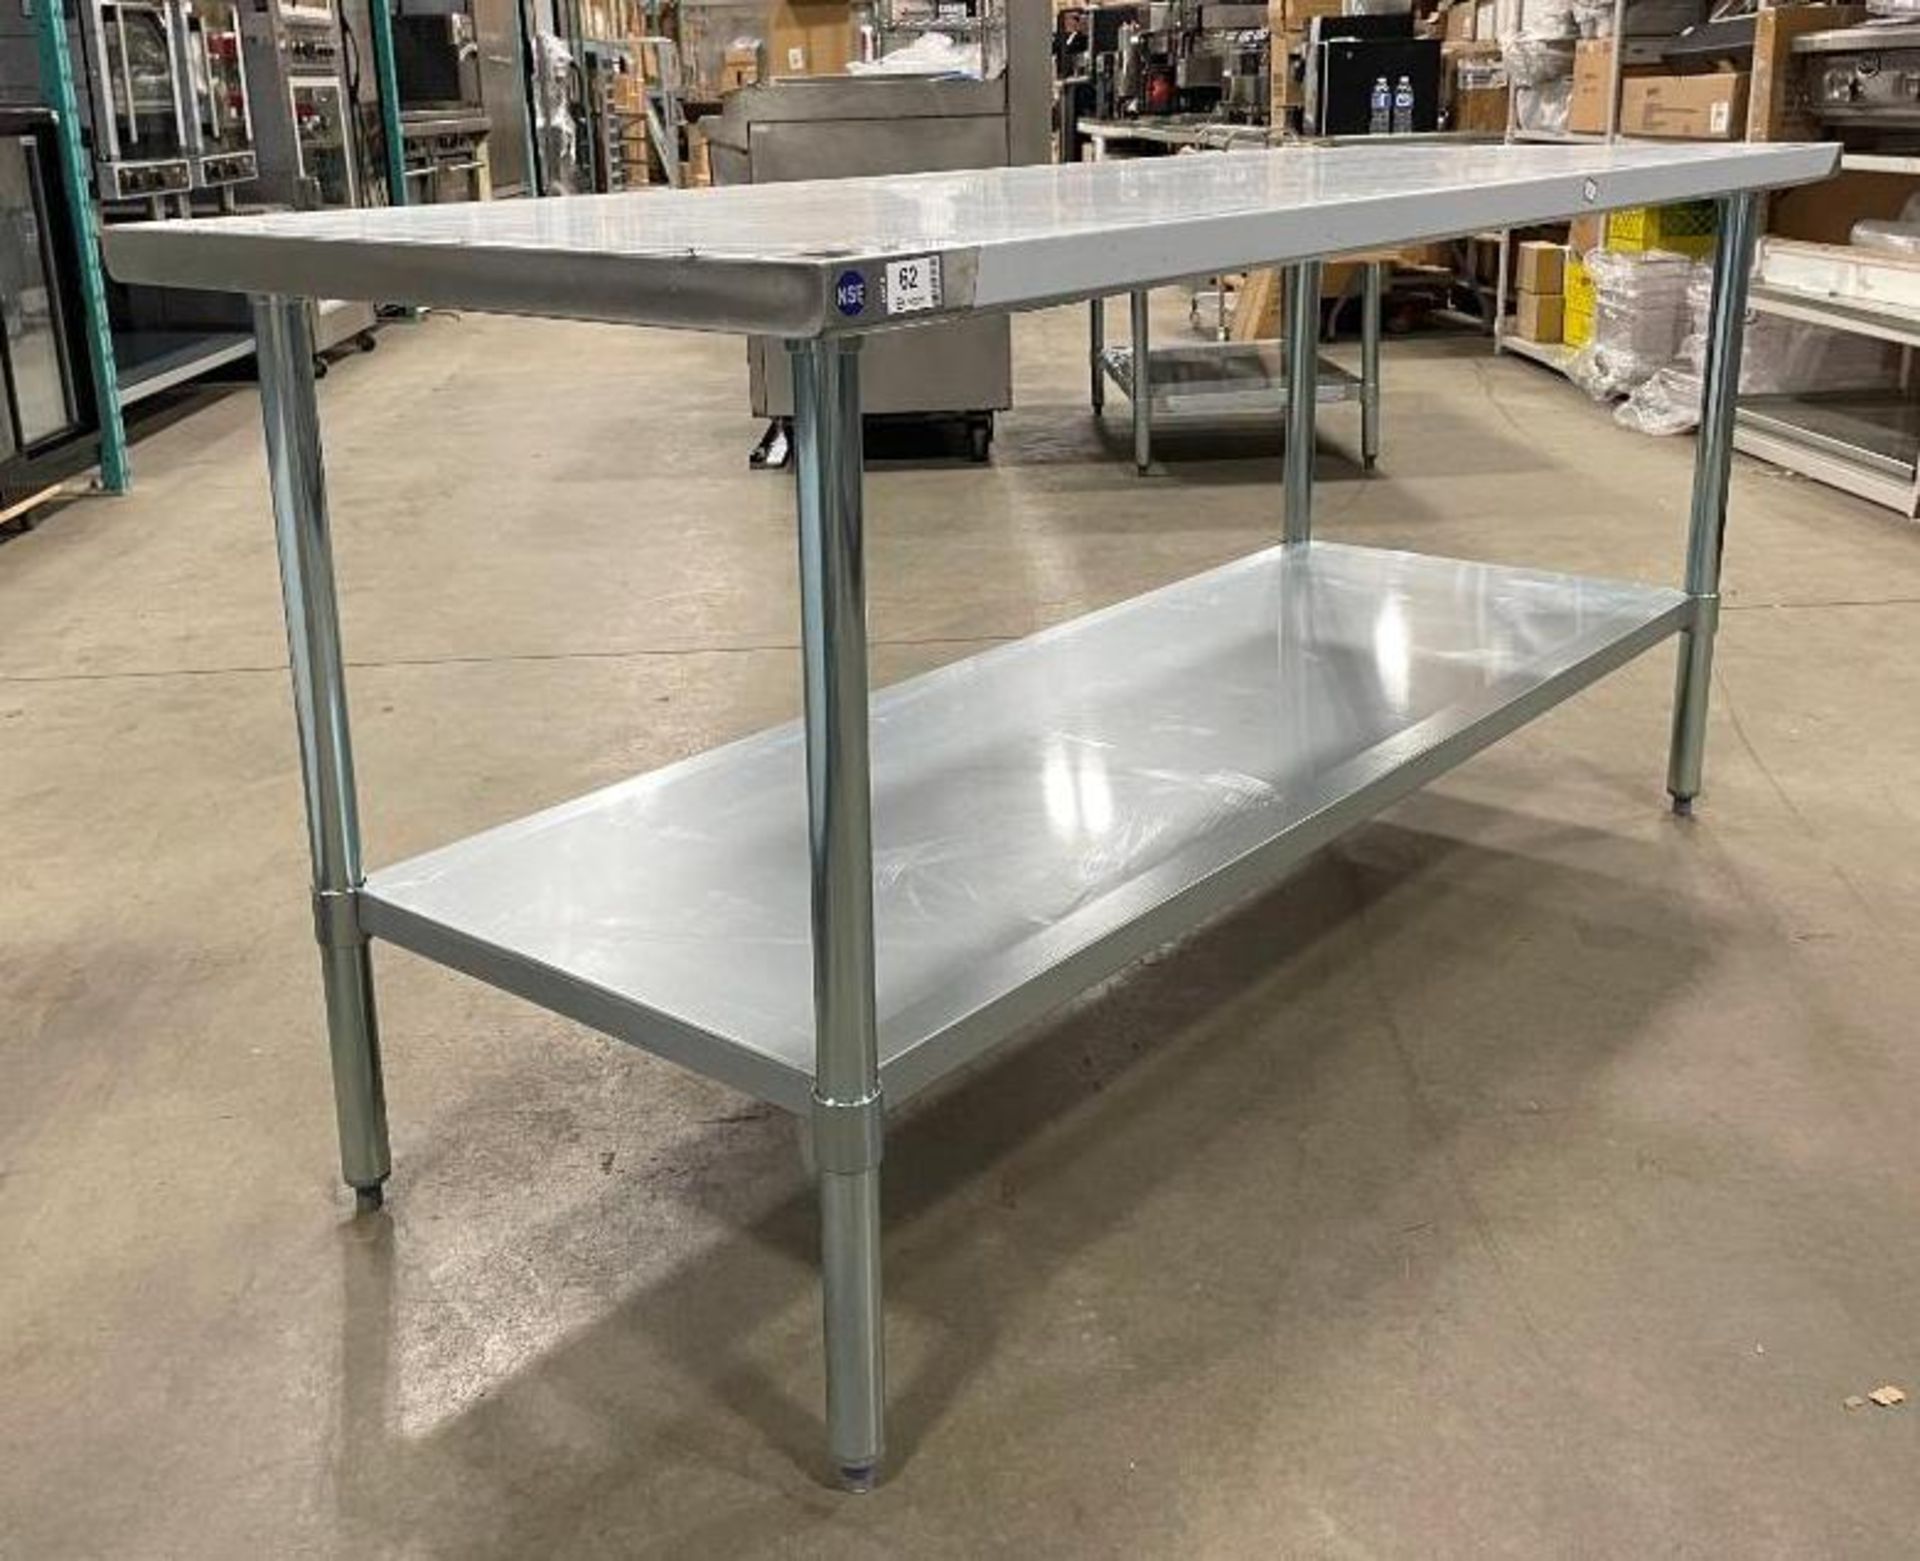 NEW 30" X 72" STAINLESS STEEL WORK TABLE WITH UNDERSHELF - Image 10 of 10